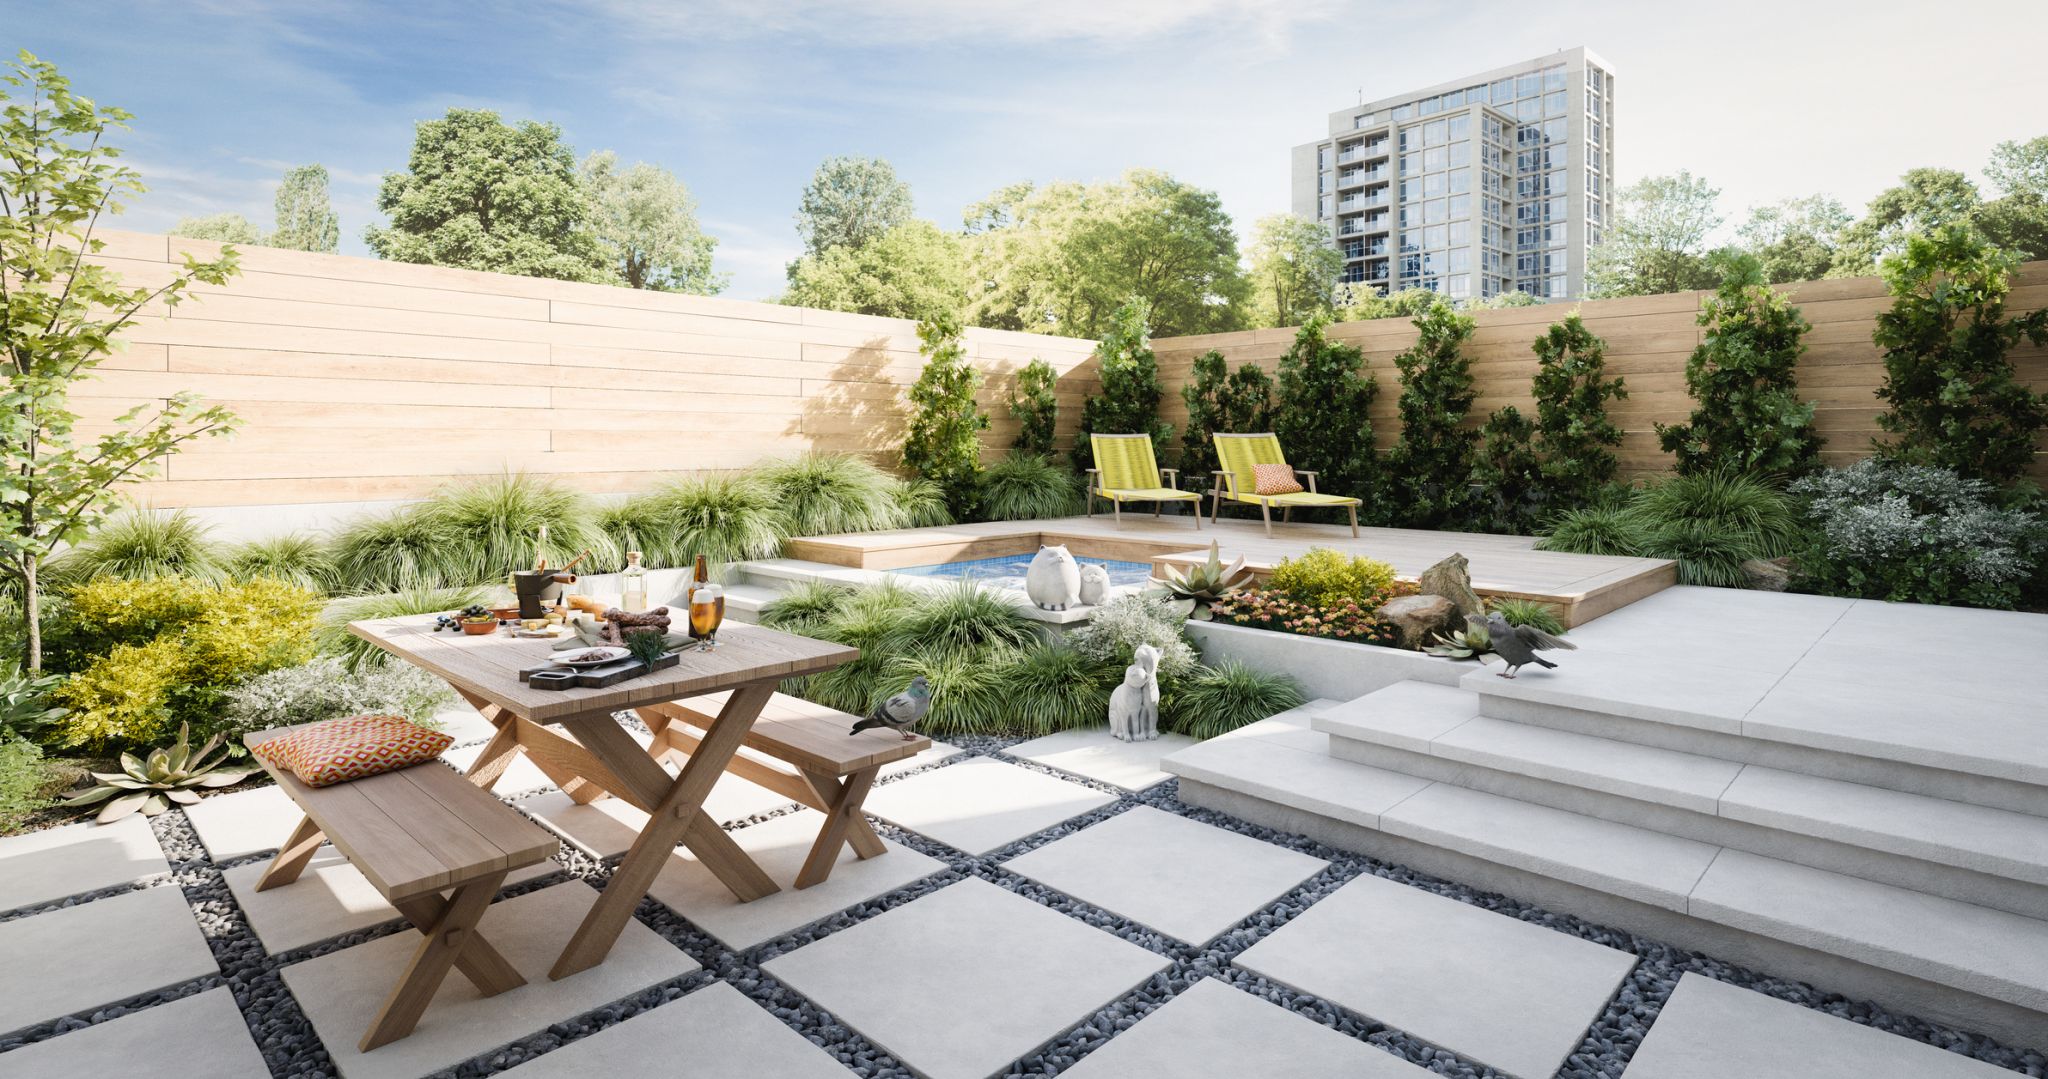 4 Backyard Design Ideas To Consider For Your Home